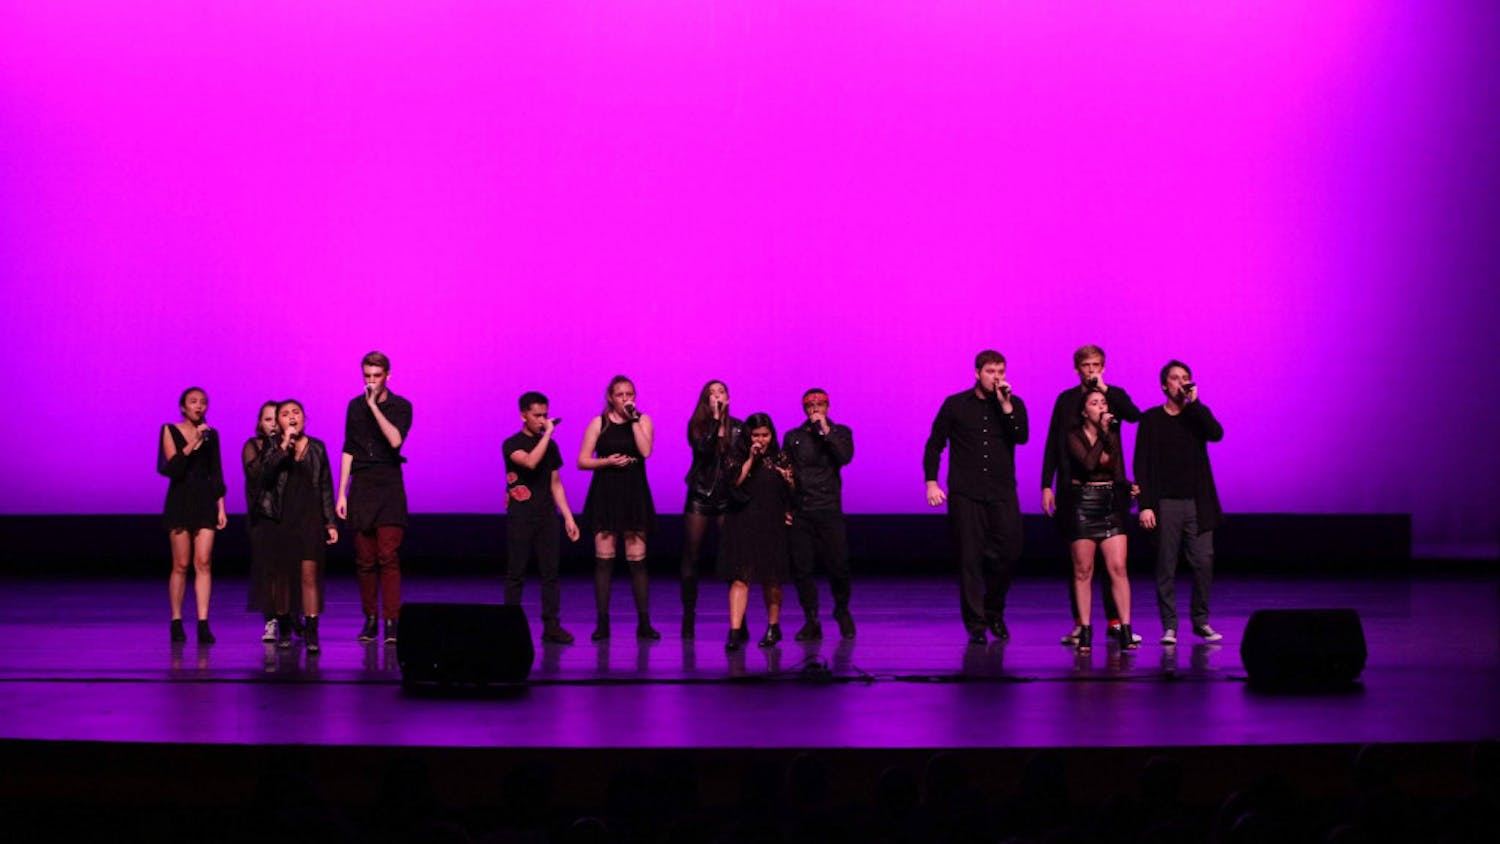 The a cappella group Tone Def performs at the International Championship of Collegiate A Cappella in 2018. The group plans to release its first recorded album in Fall 2019. Courtesy to The Alligator